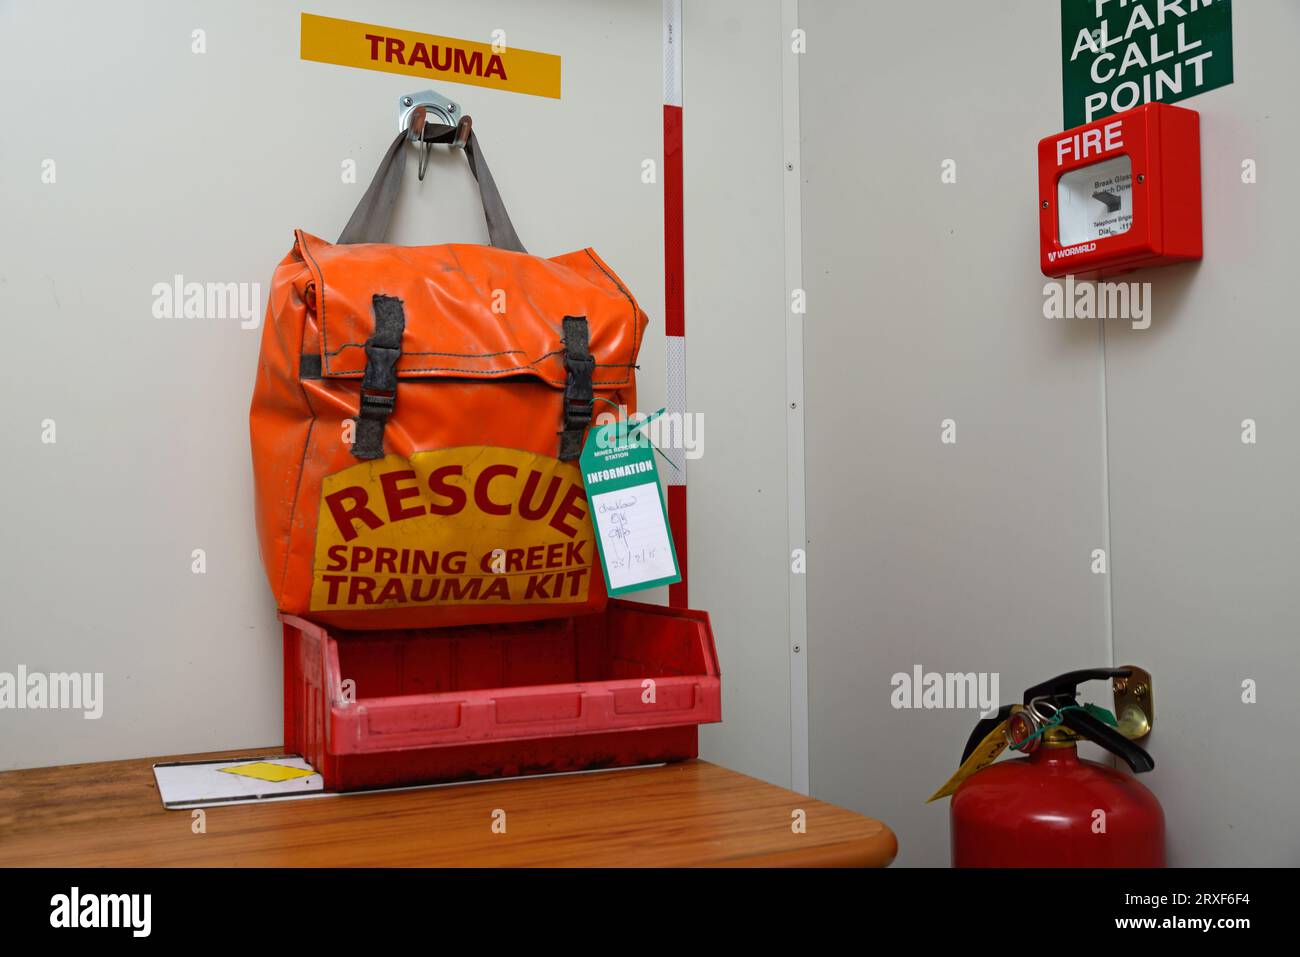 GREYMOUTH, NEW ZEALAND, MAY 20, 2015: A trauma kit packed and ready to go at a working coal mine near Greymouth, New Zealand Stock Photo